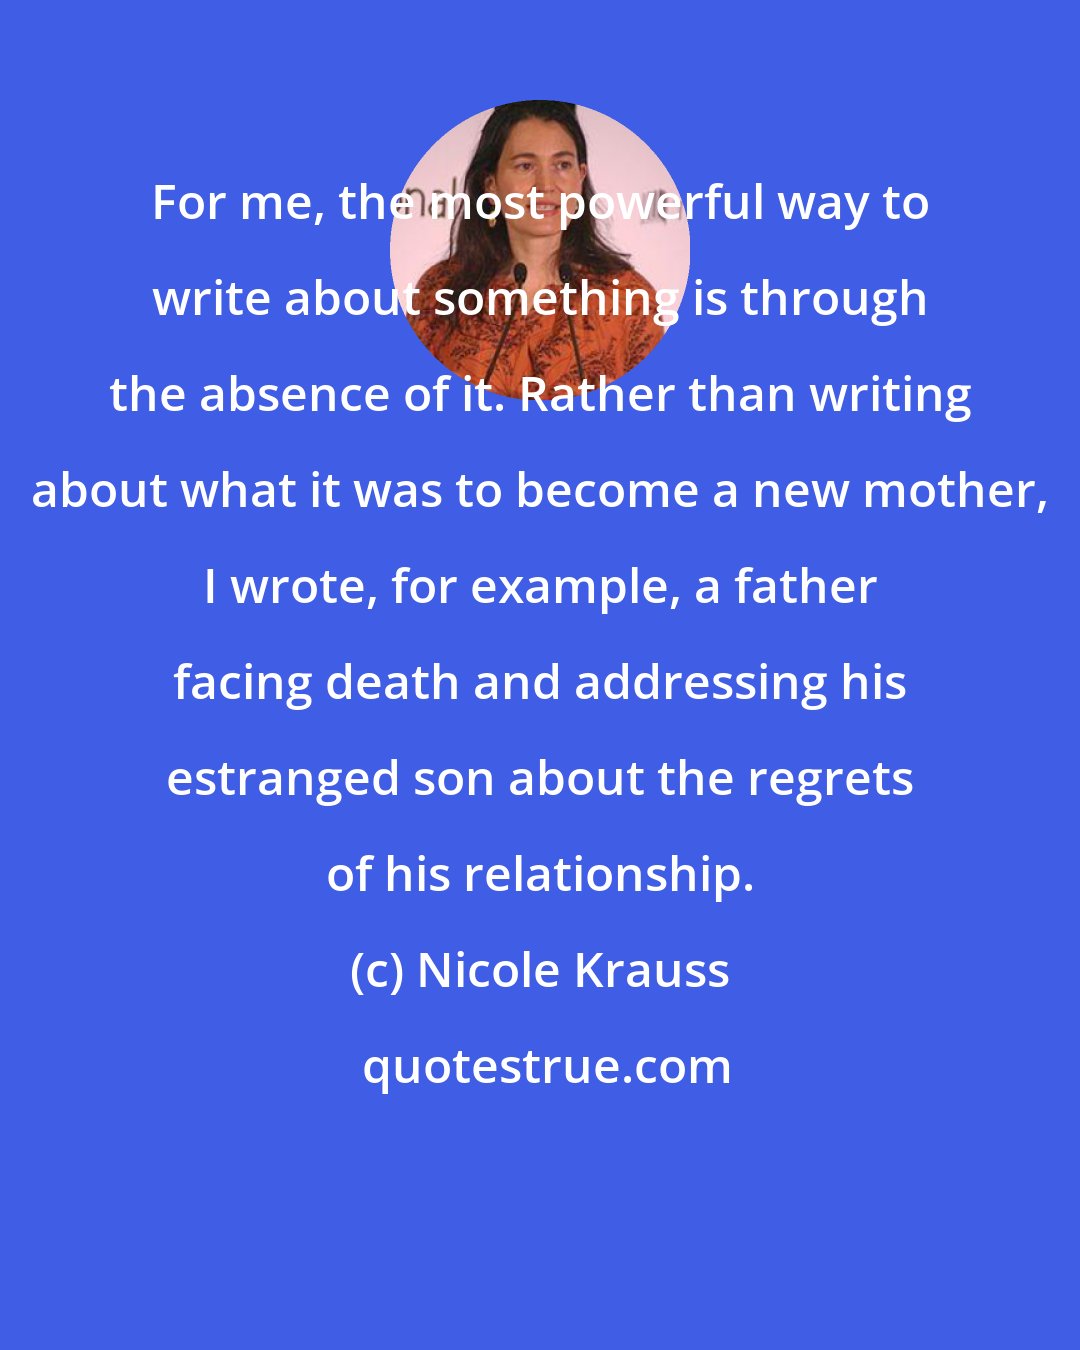 Nicole Krauss: For me, the most powerful way to write about something is through the absence of it. Rather than writing about what it was to become a new mother, I wrote, for example, a father facing death and addressing his estranged son about the regrets of his relationship.